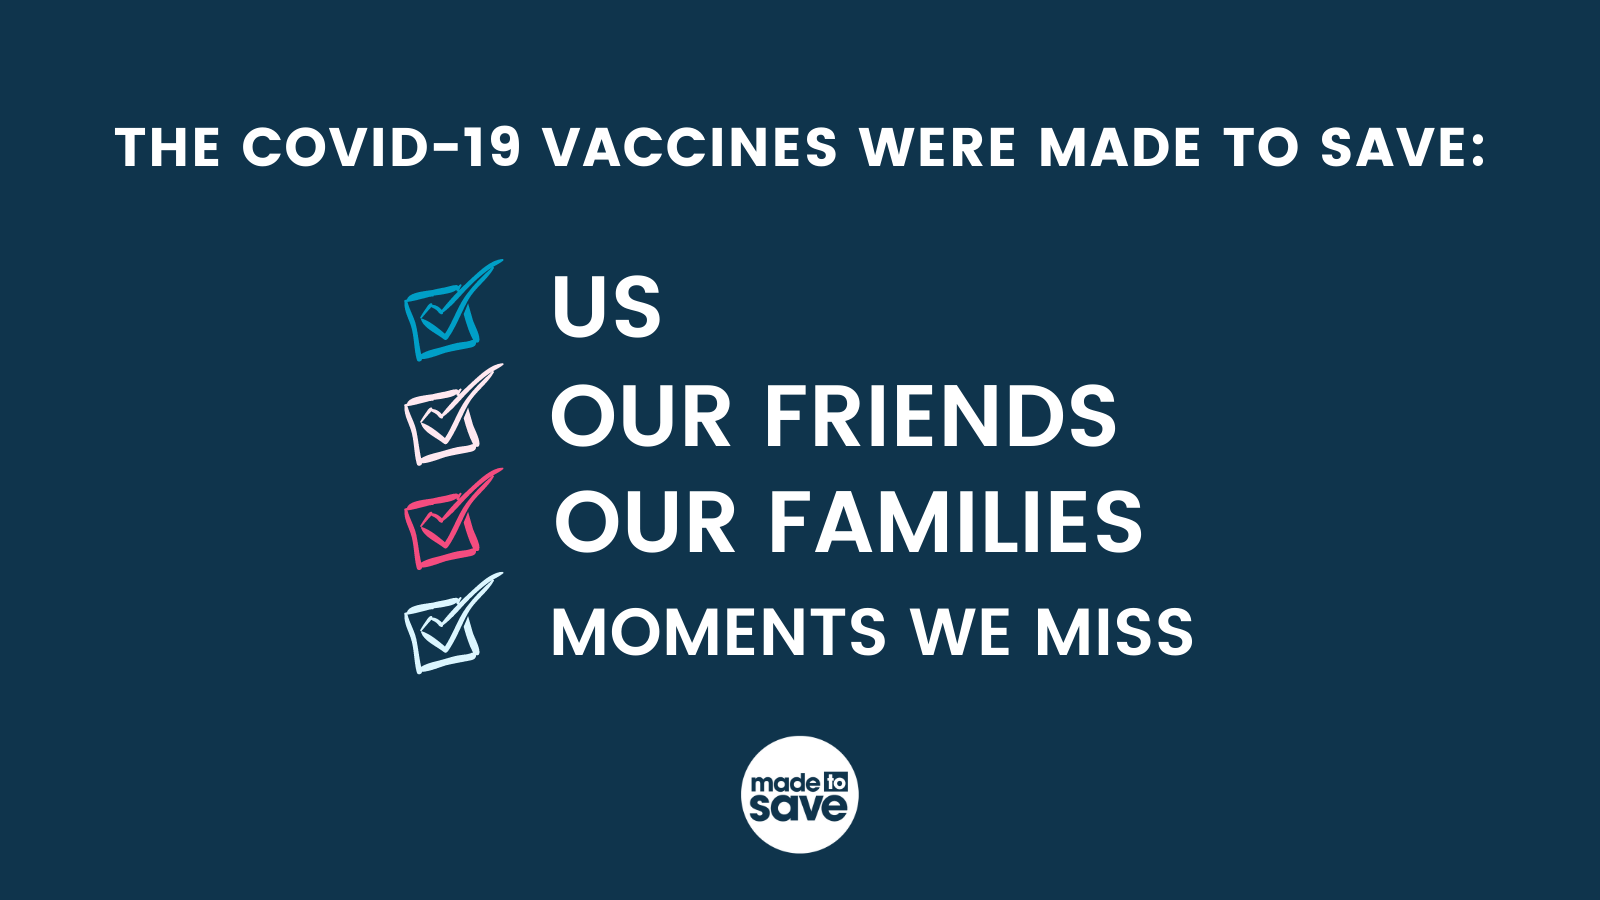 Graphic with dark blue background. In white texts, the graphic reads: "The COVID-19 Vaccines were Made to Save: Us, Our Friends, Our Families, Moments We Miss."